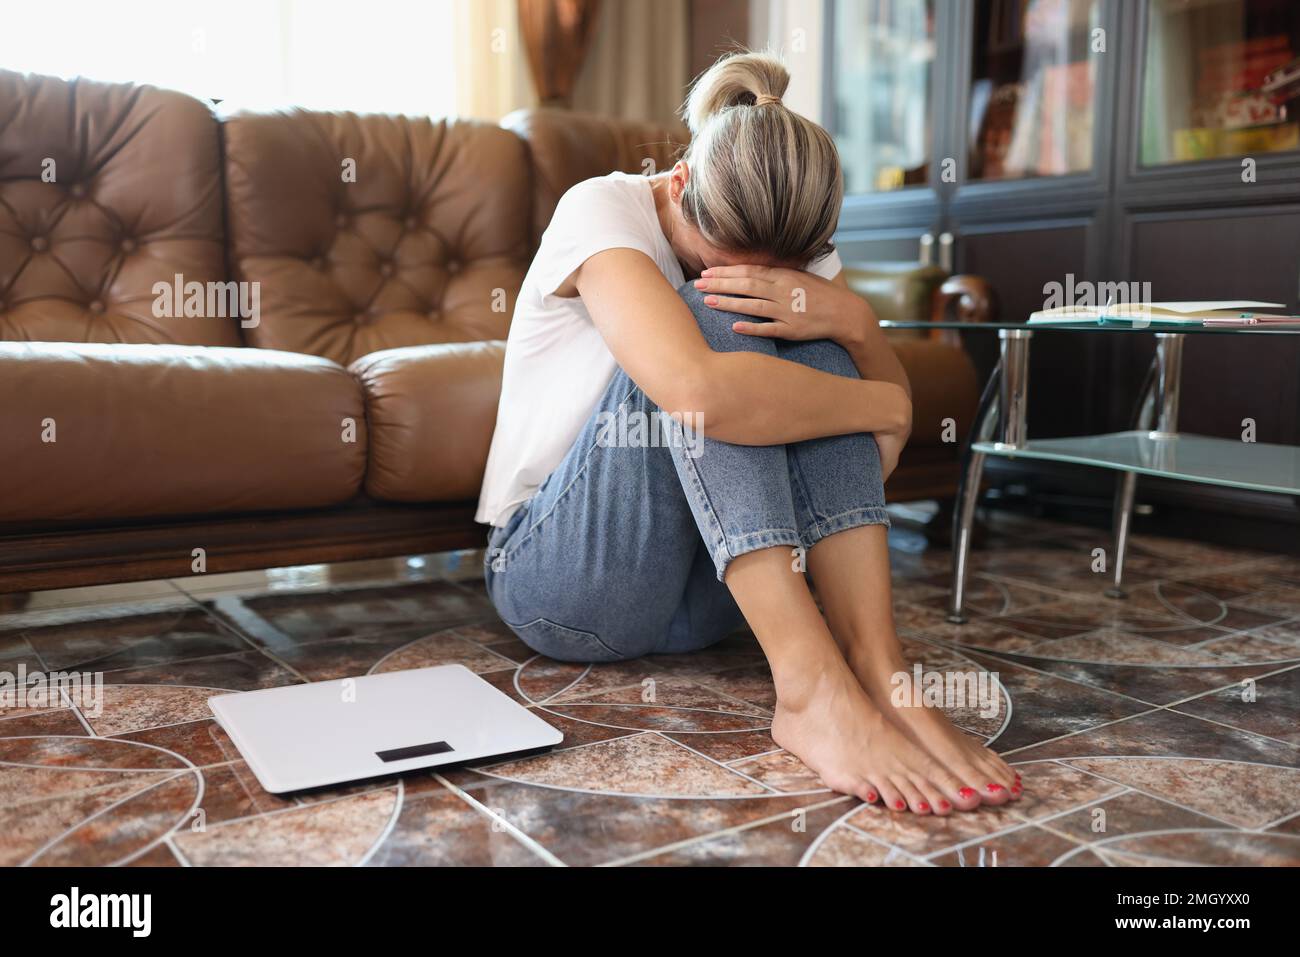 Sad woman sits on floor near scales and holding her knees by hands. Stock Photo